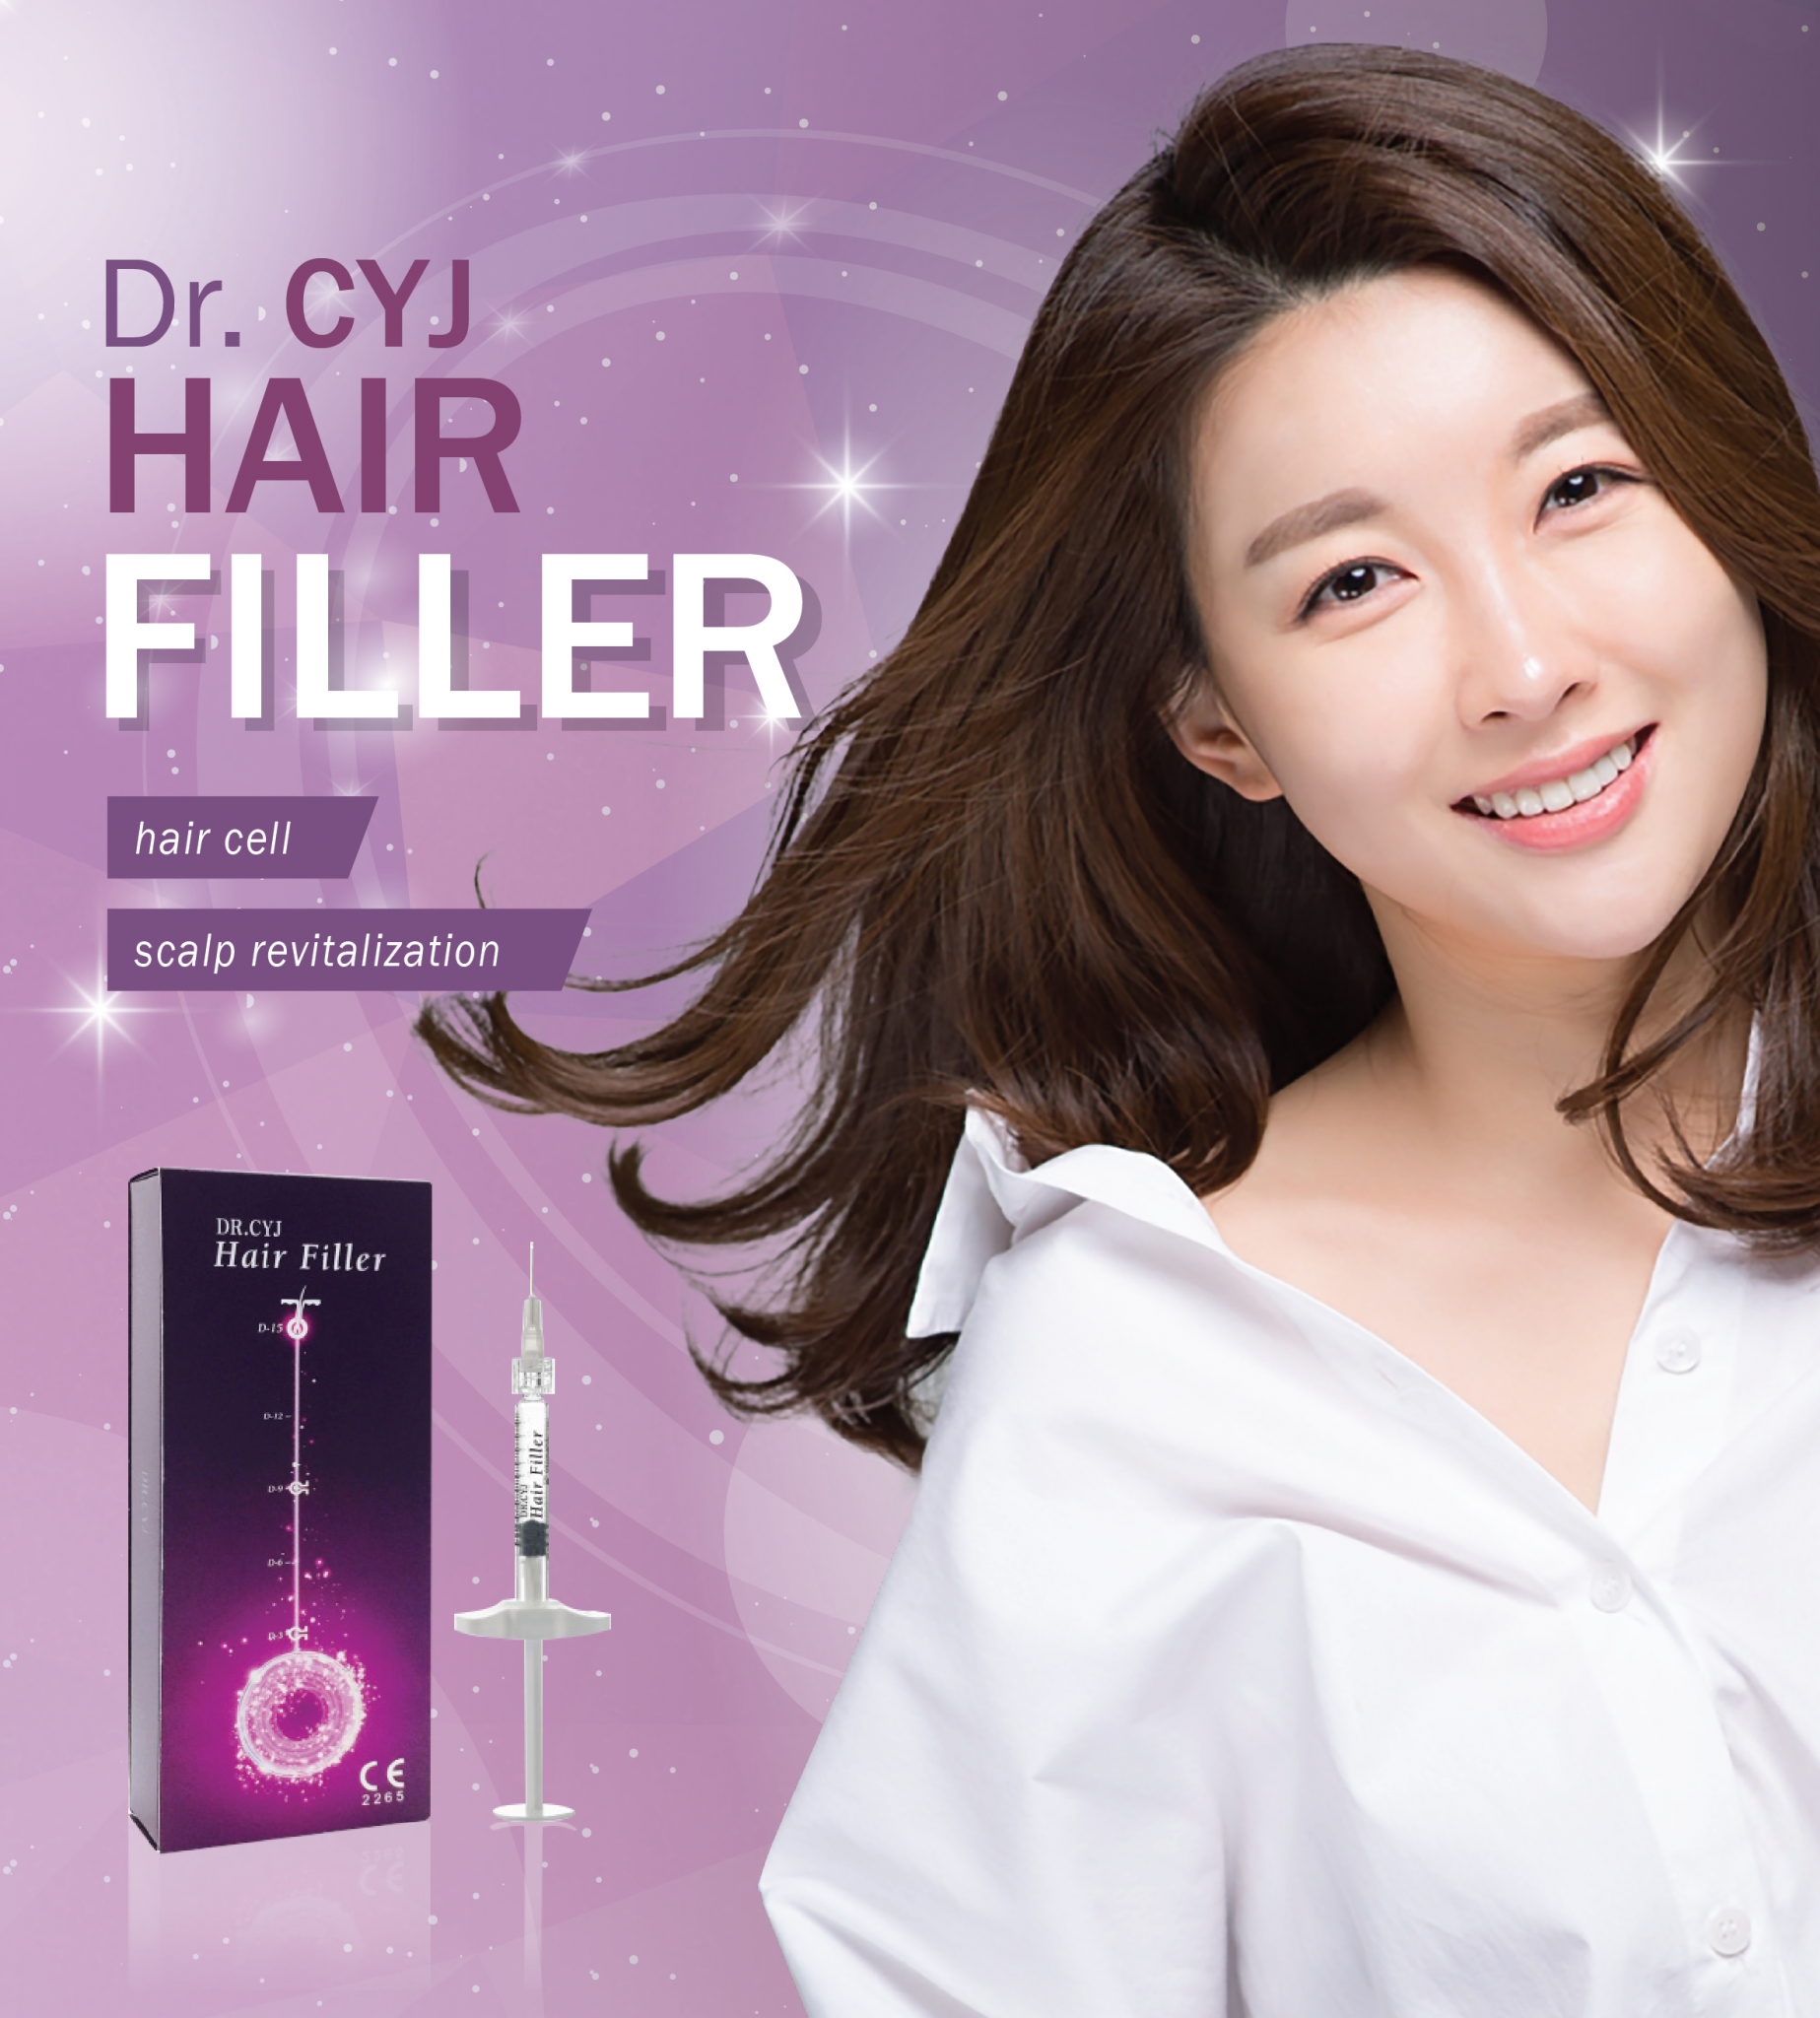 Dr. CYJ Hair filler OLD | Clinic RX